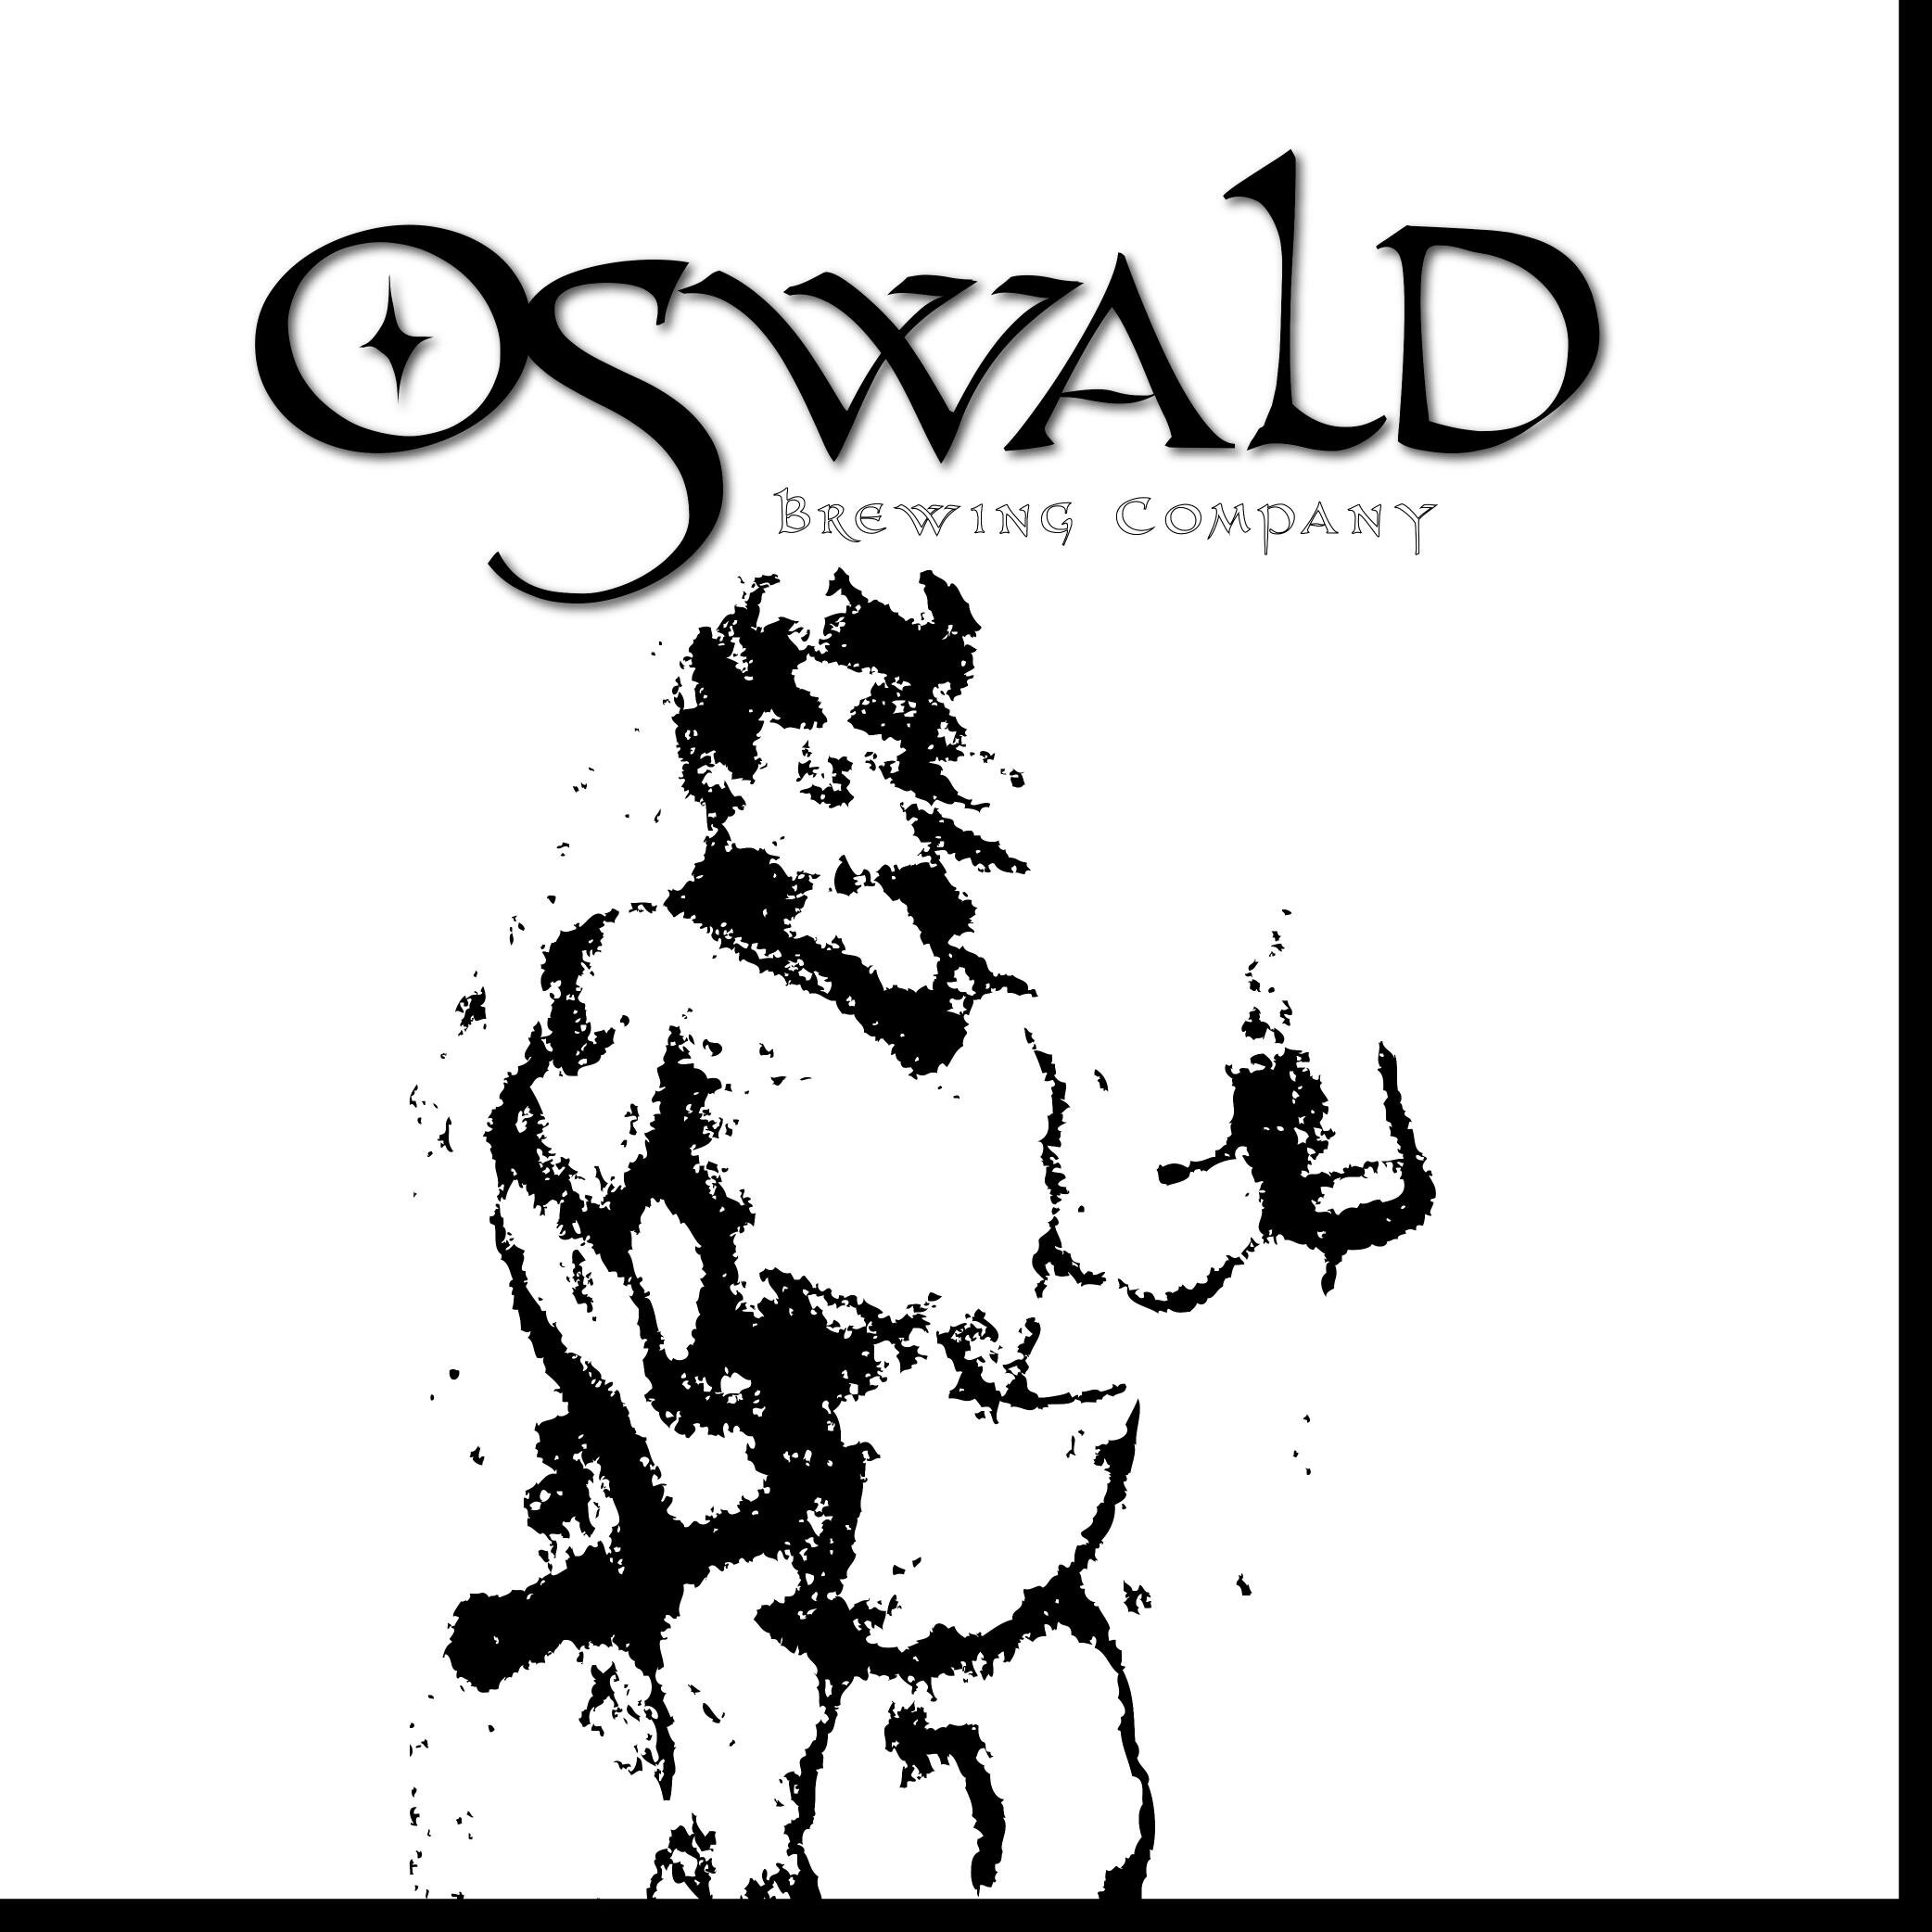 Oswald Brewing Comp